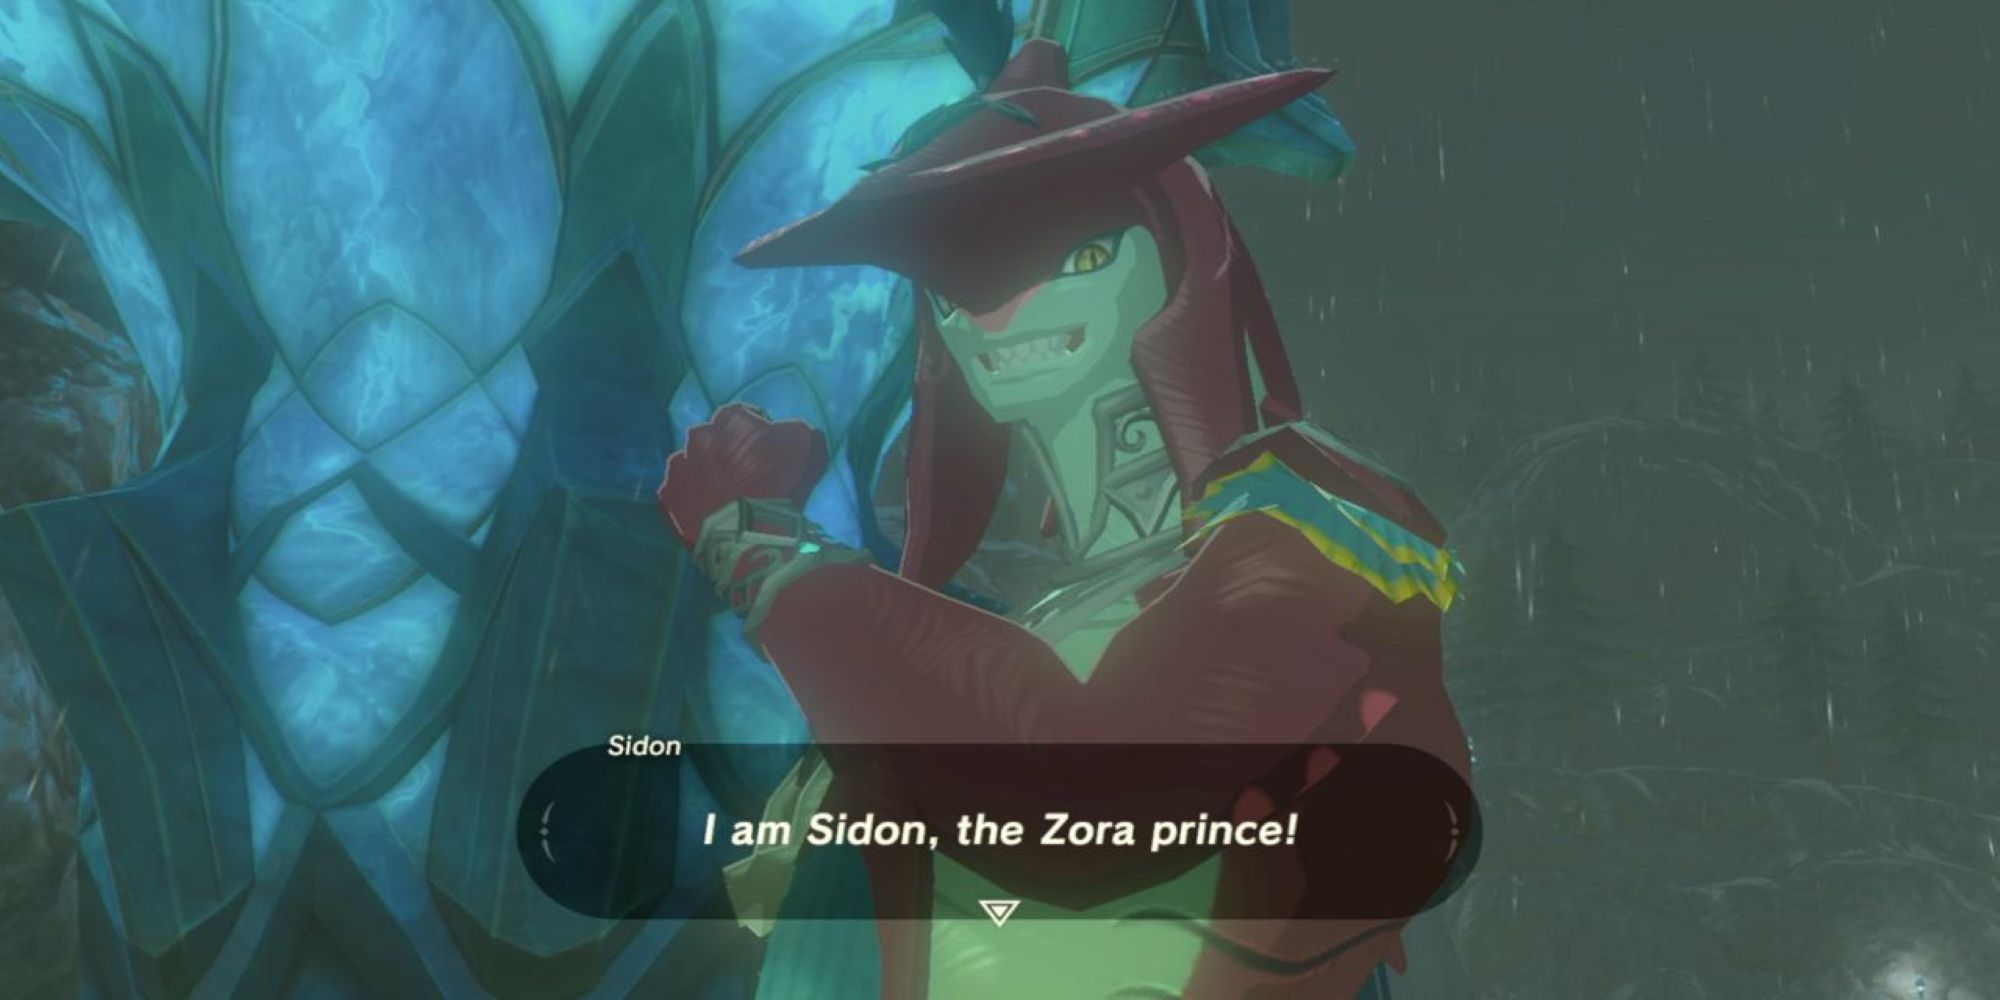 Sidon from The Legend of Zelda: Breath of the Wild points to himself with gusto as he introduces himself.